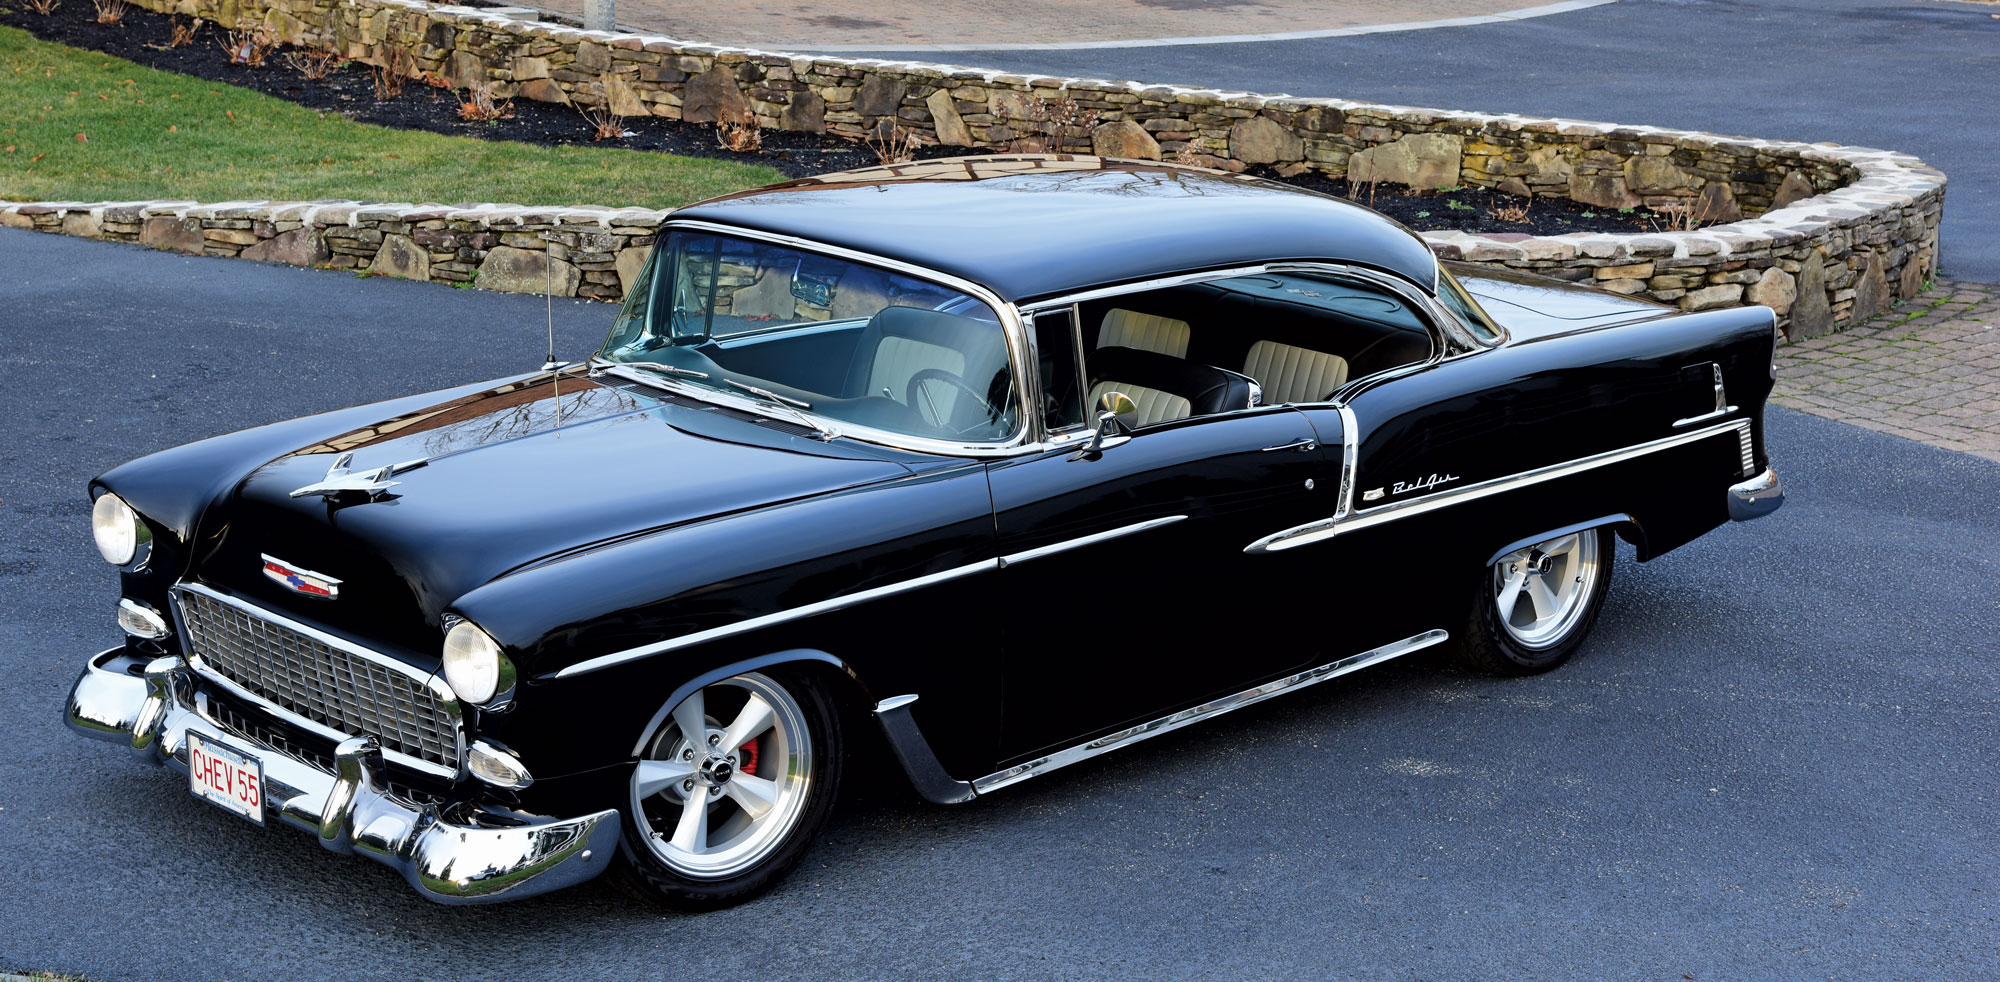 ’55 Chevy Bel Air angled view